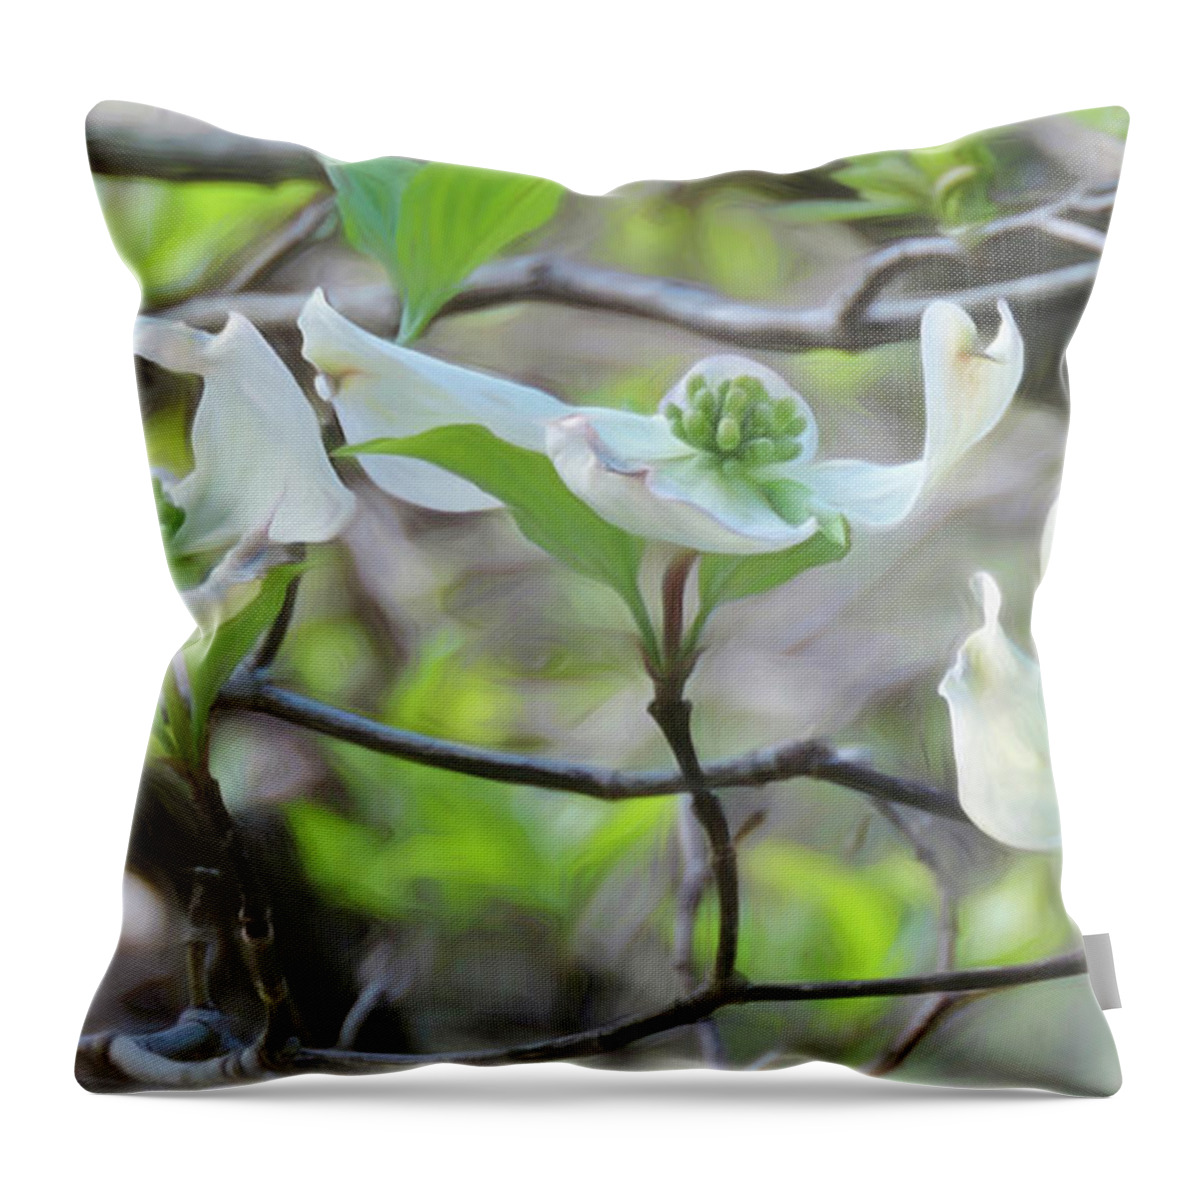 Dogwood Throw Pillow featuring the digital art Dogwood Blooms by Susan Hope Finley